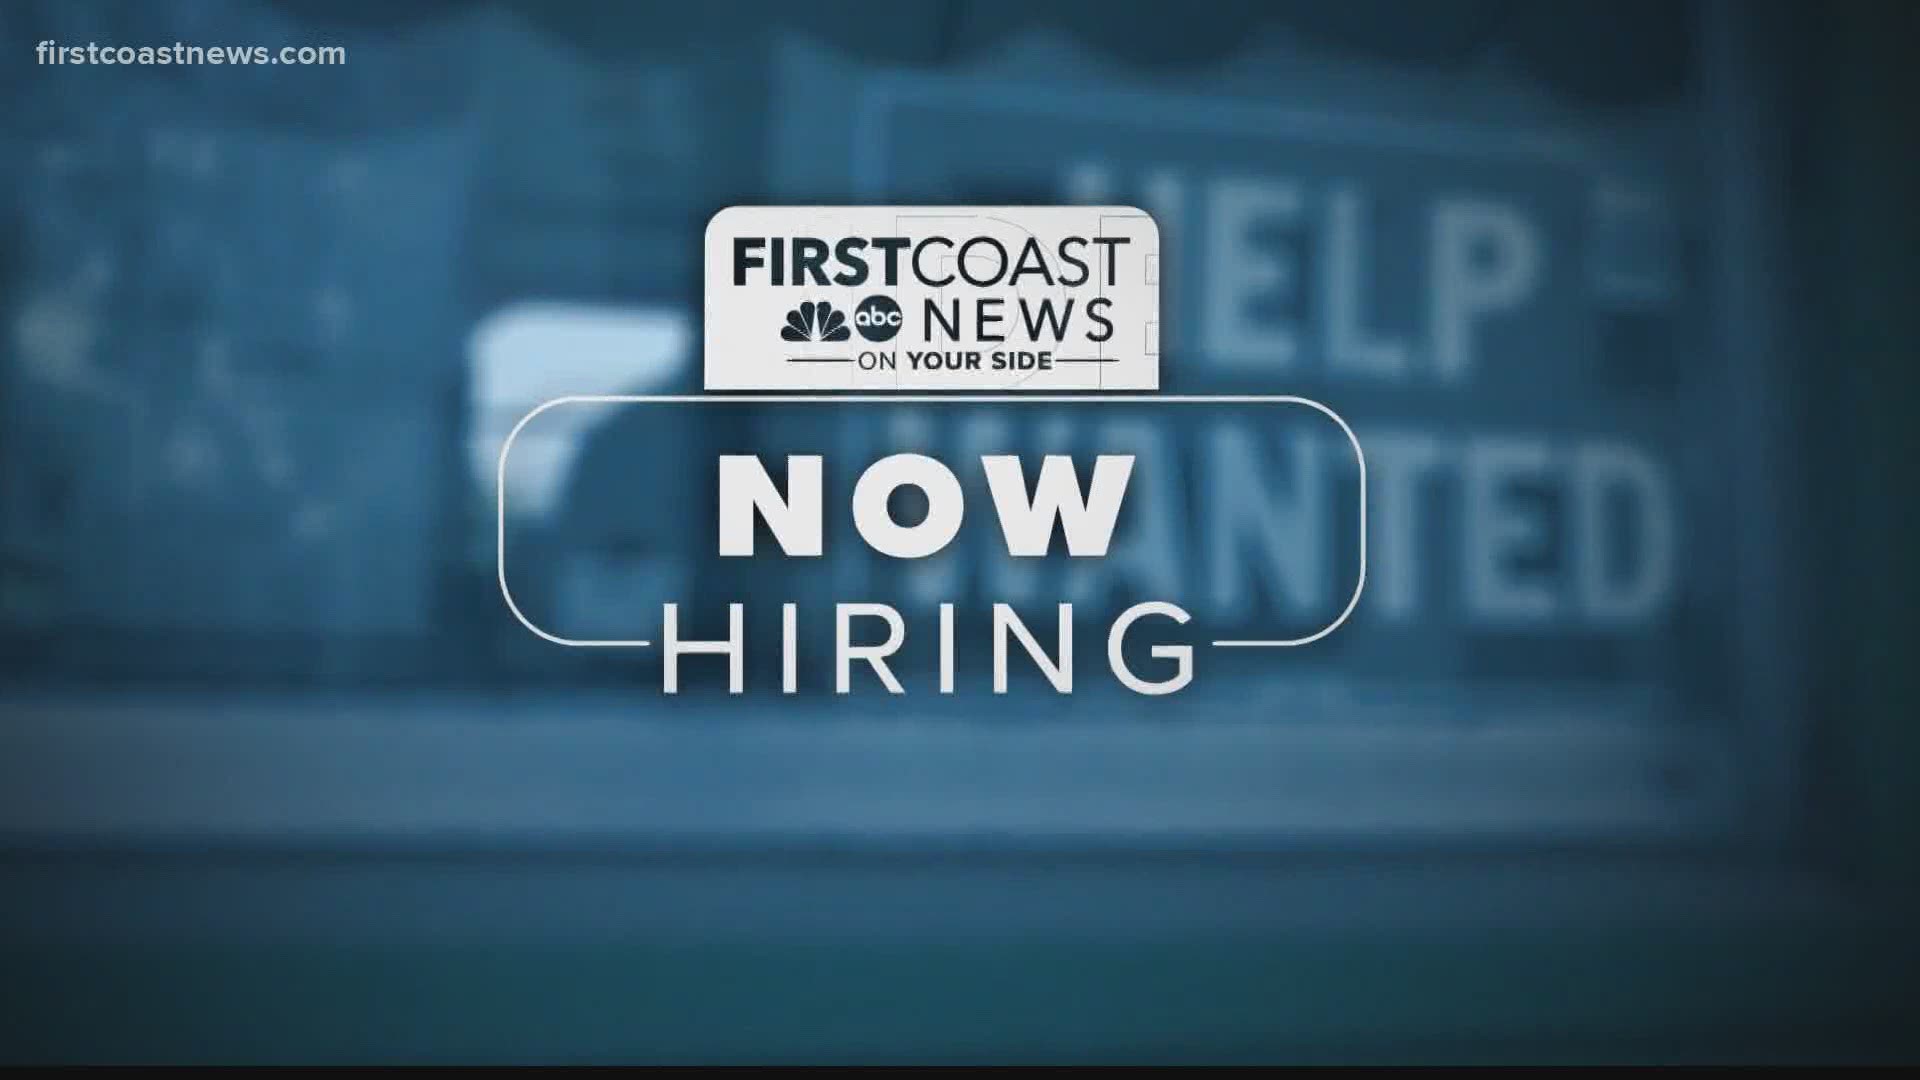 Here's who's hiring on the First Coast.